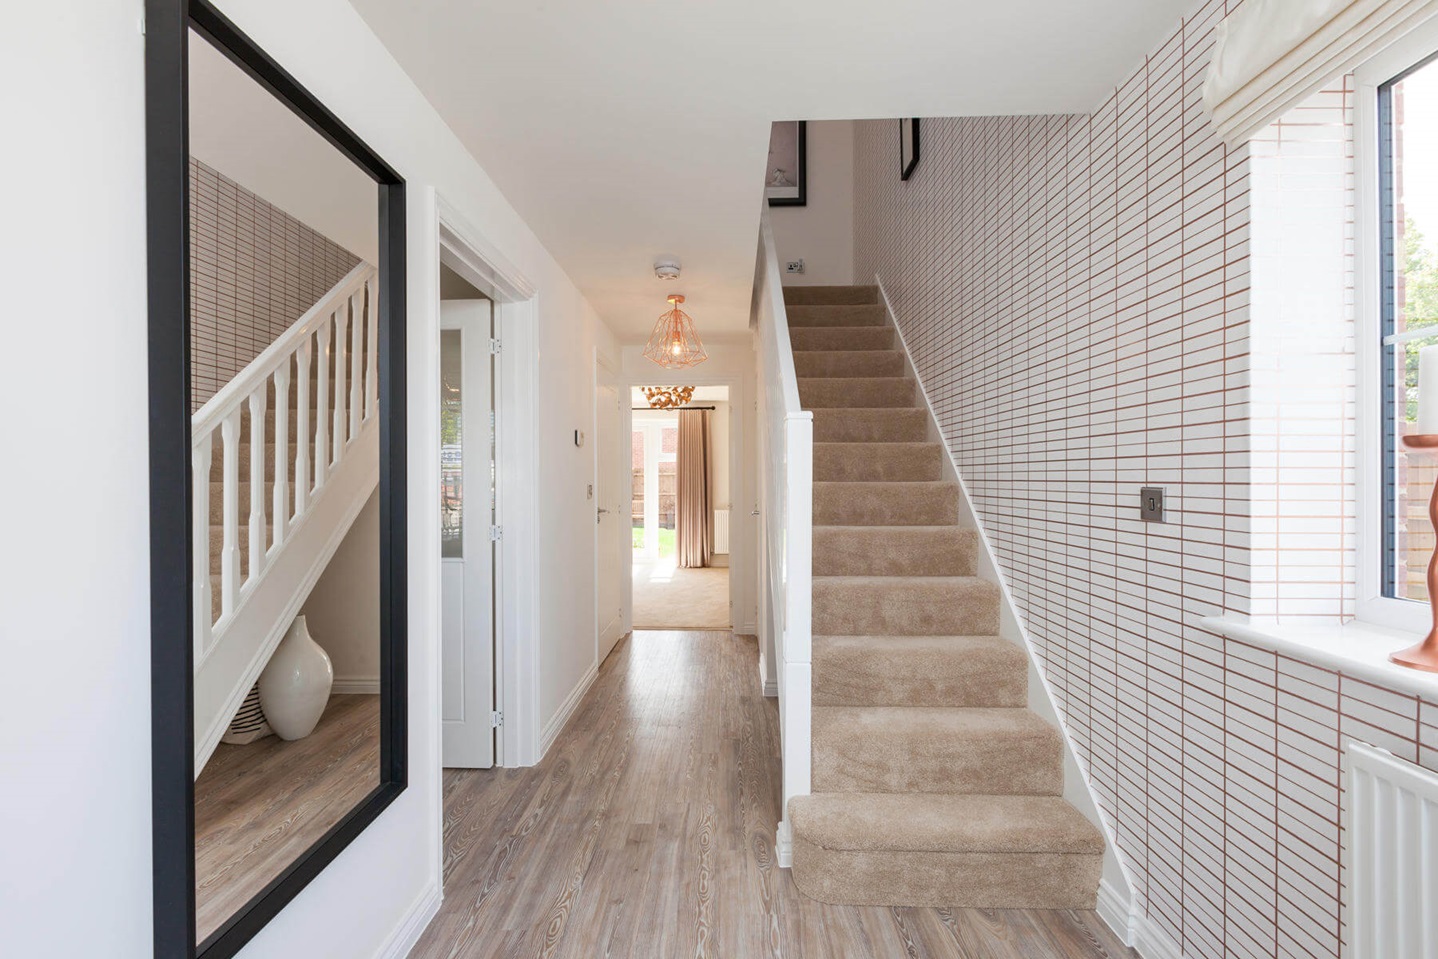 Get the show home Hallway look ‧ Taylor Wimpey